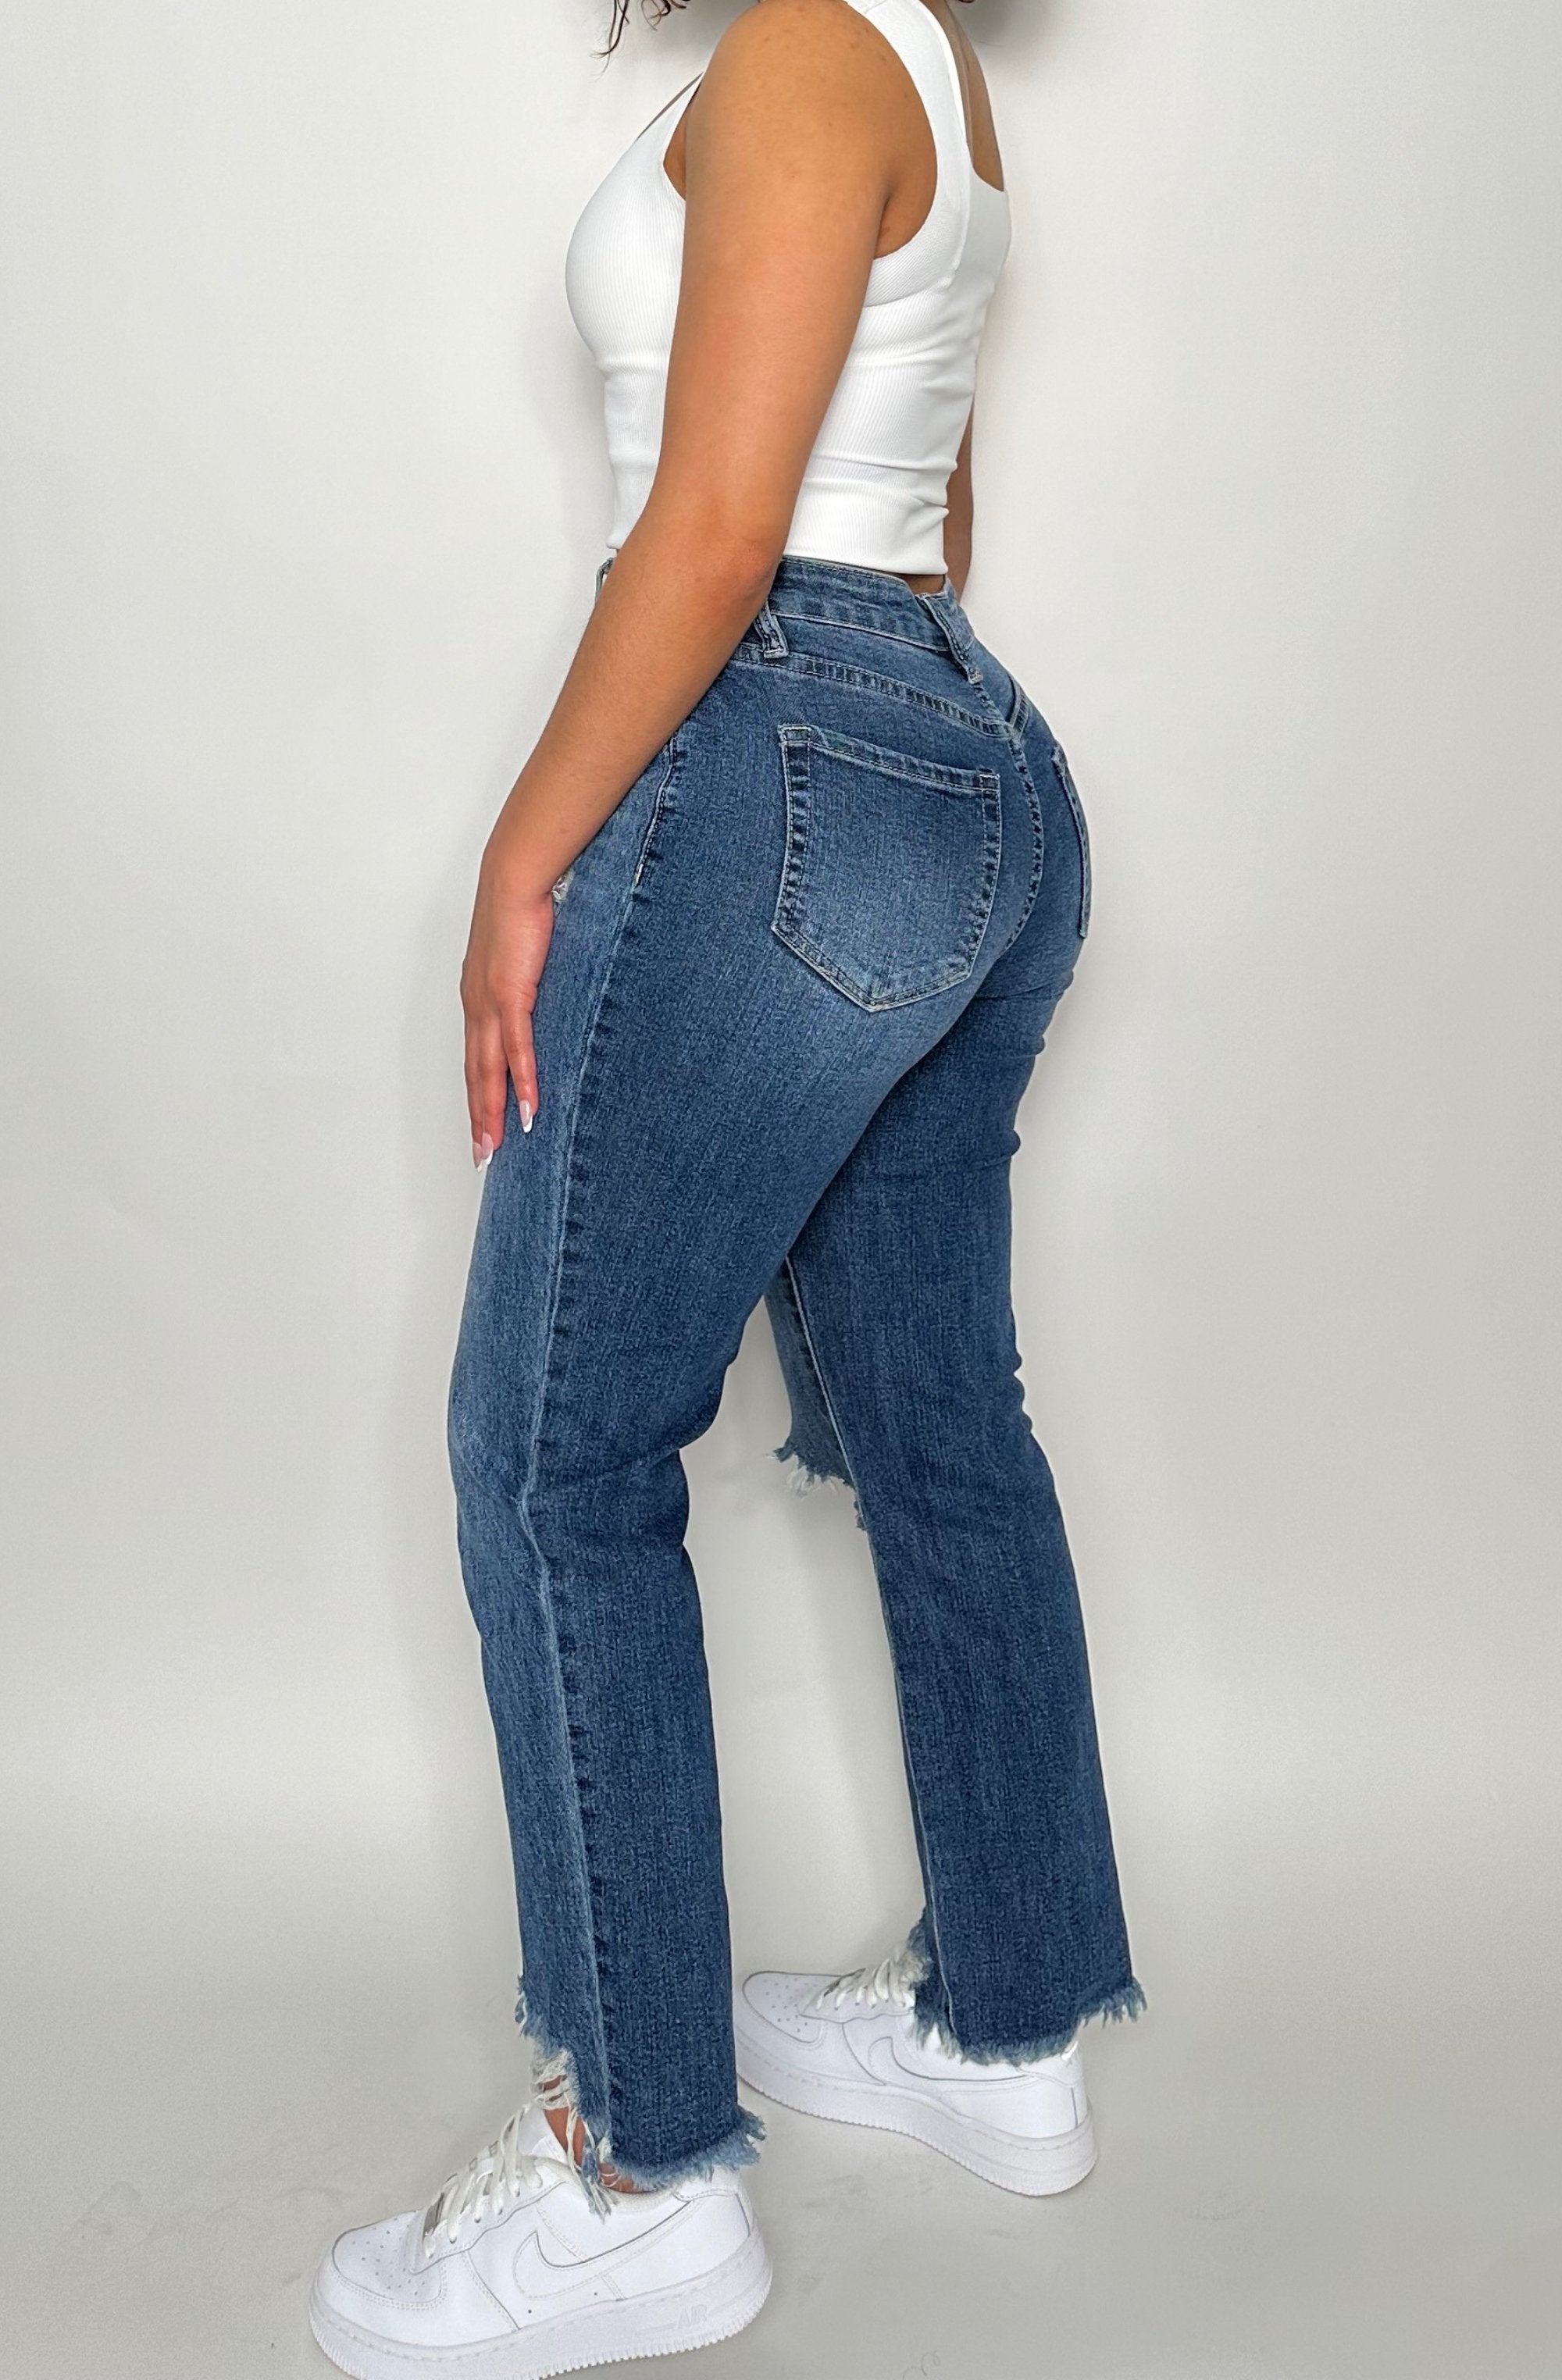 NatxCustomStyle Jeans  | Relaxed Jean | Frayed Slim Straight Jean